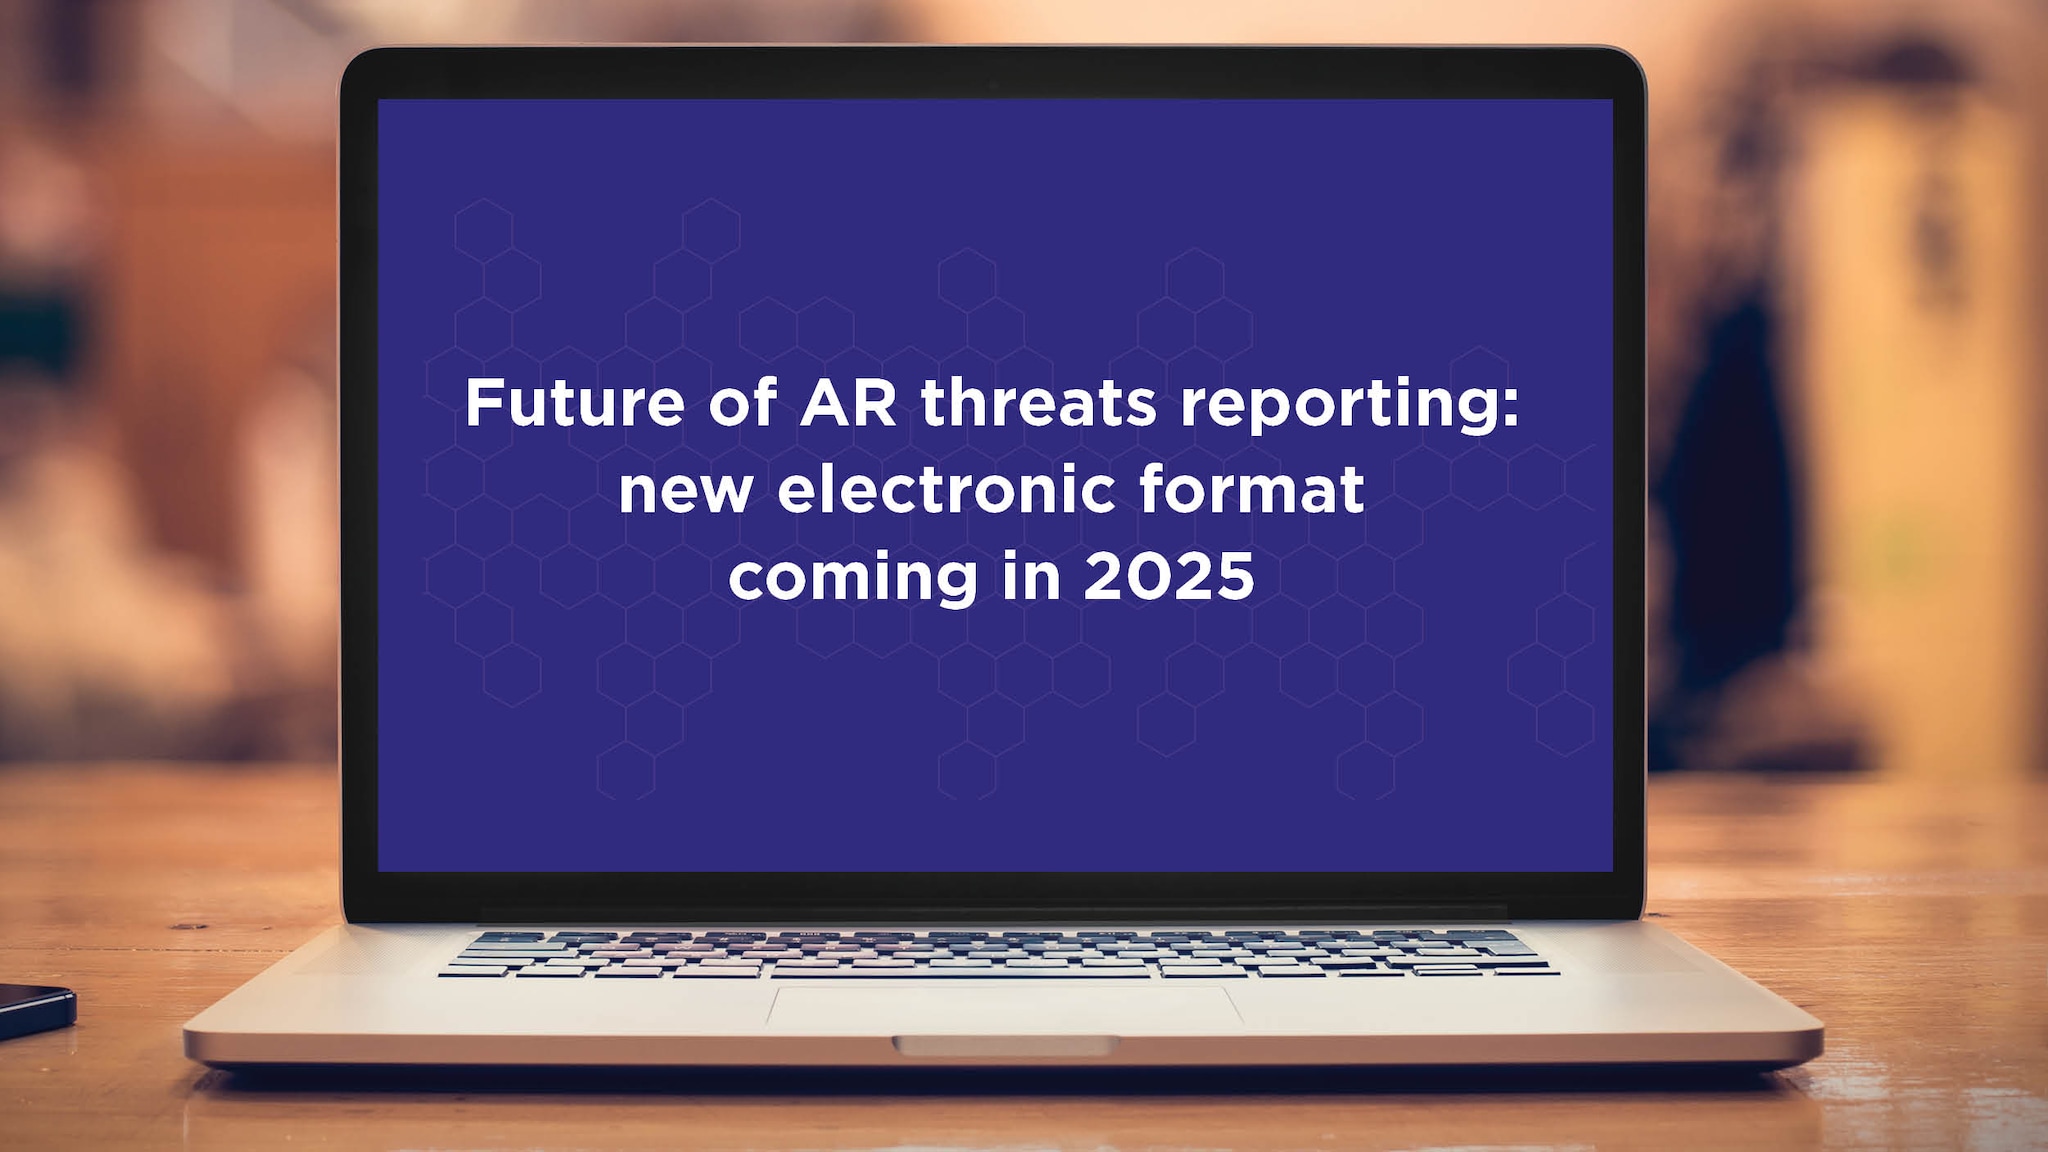 Laptop computer showing message: Future of AR Threats Reporting: New electronic format coming in 2025